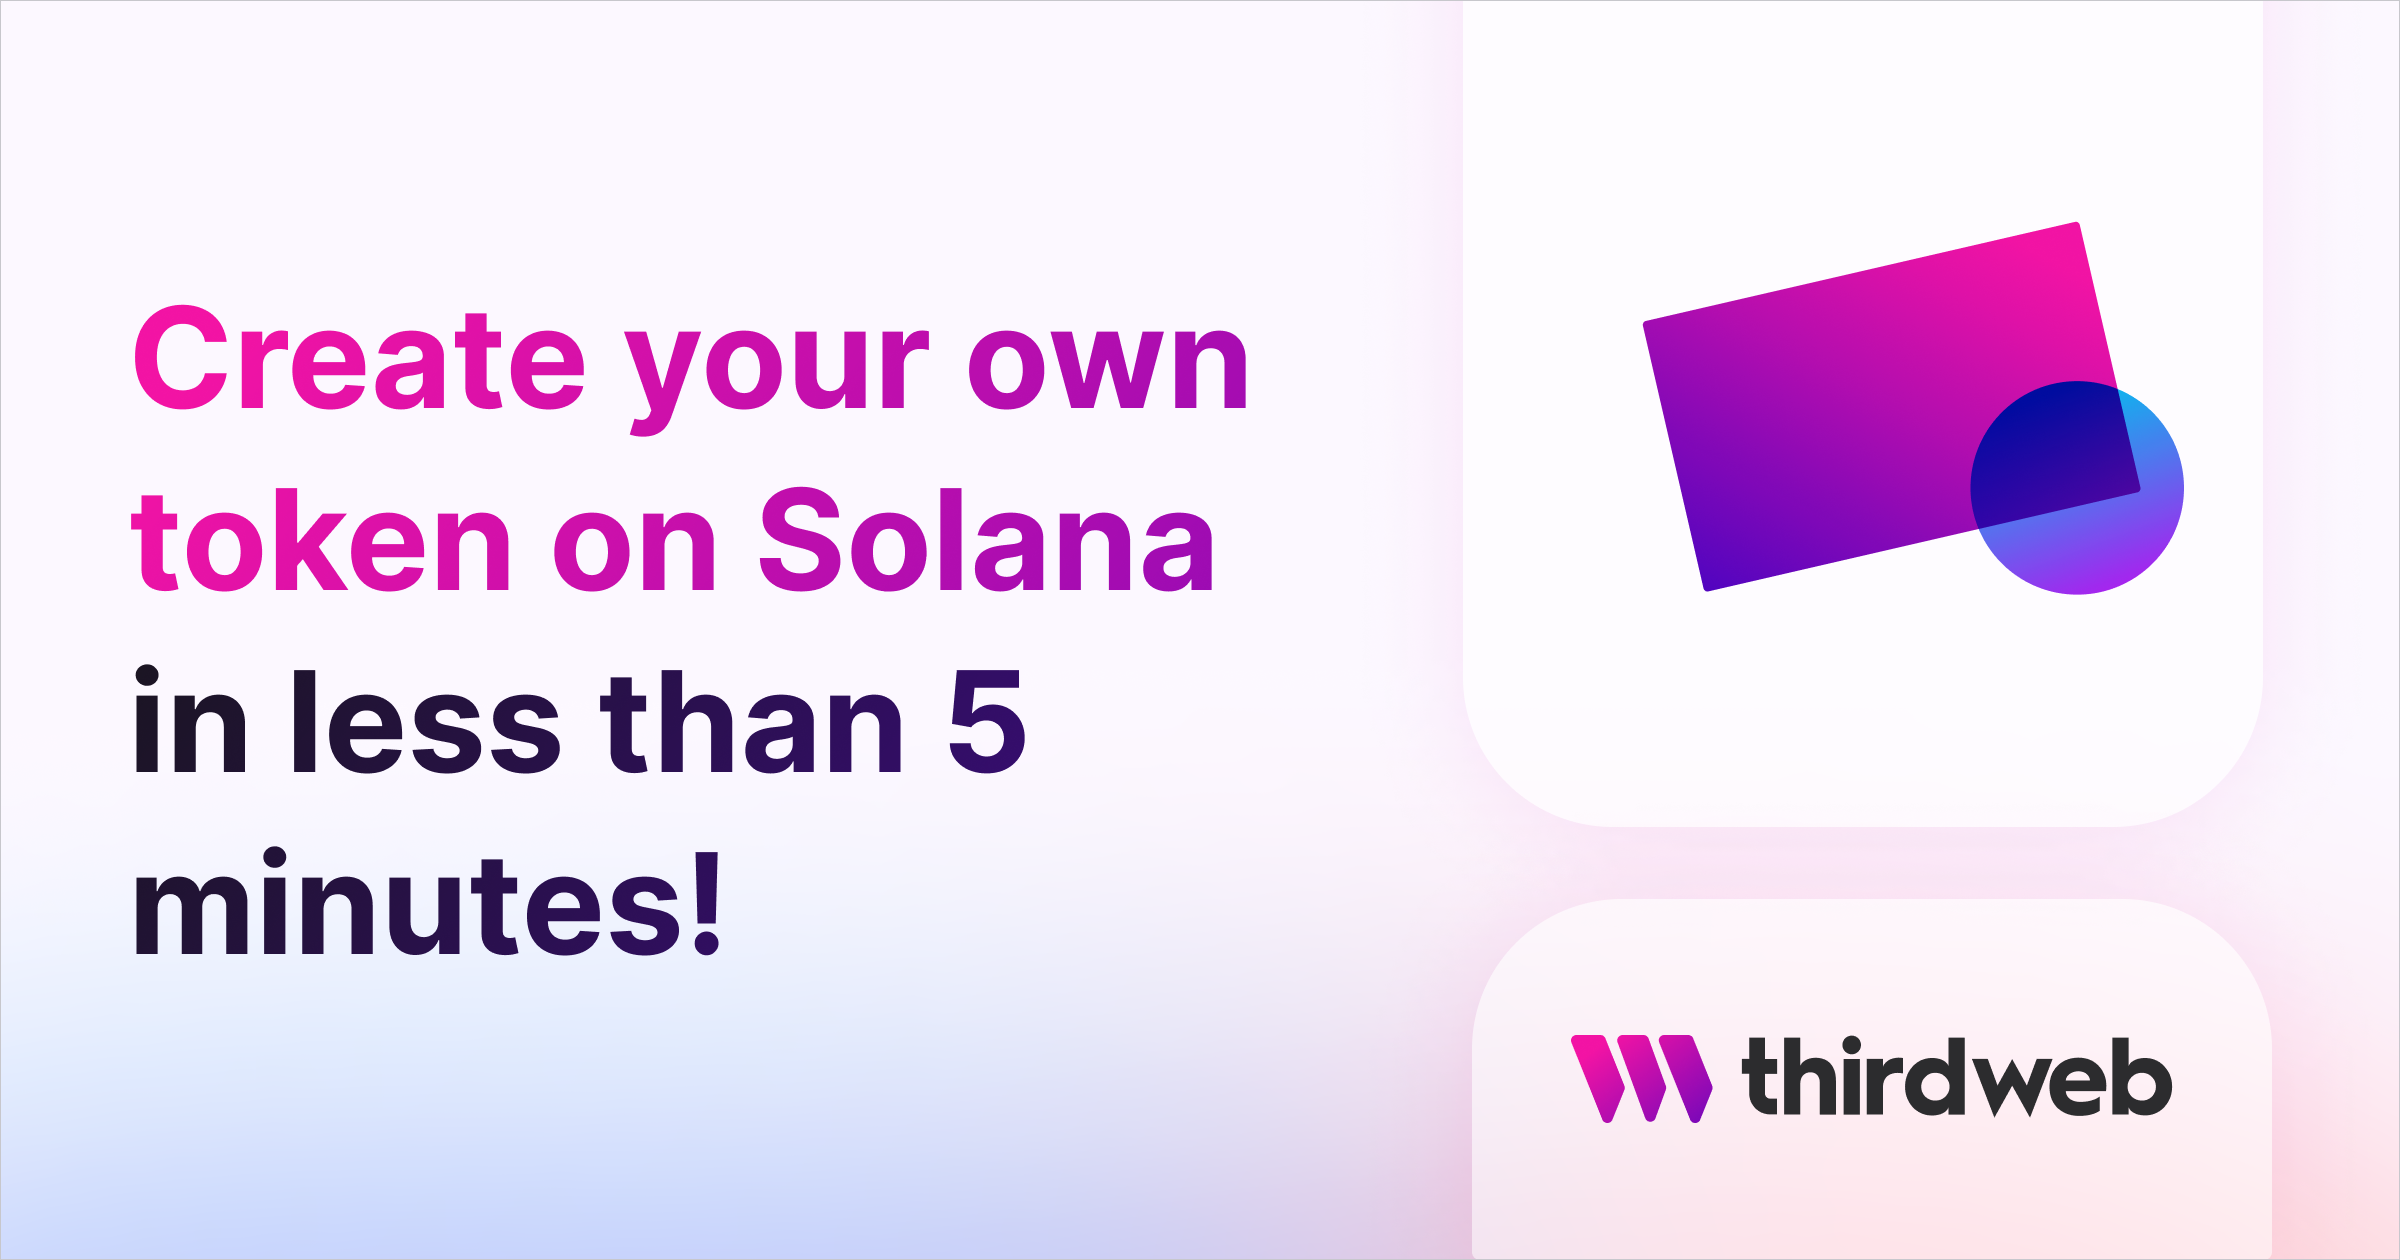 Create your own token on Solana in less than 5 minutes!